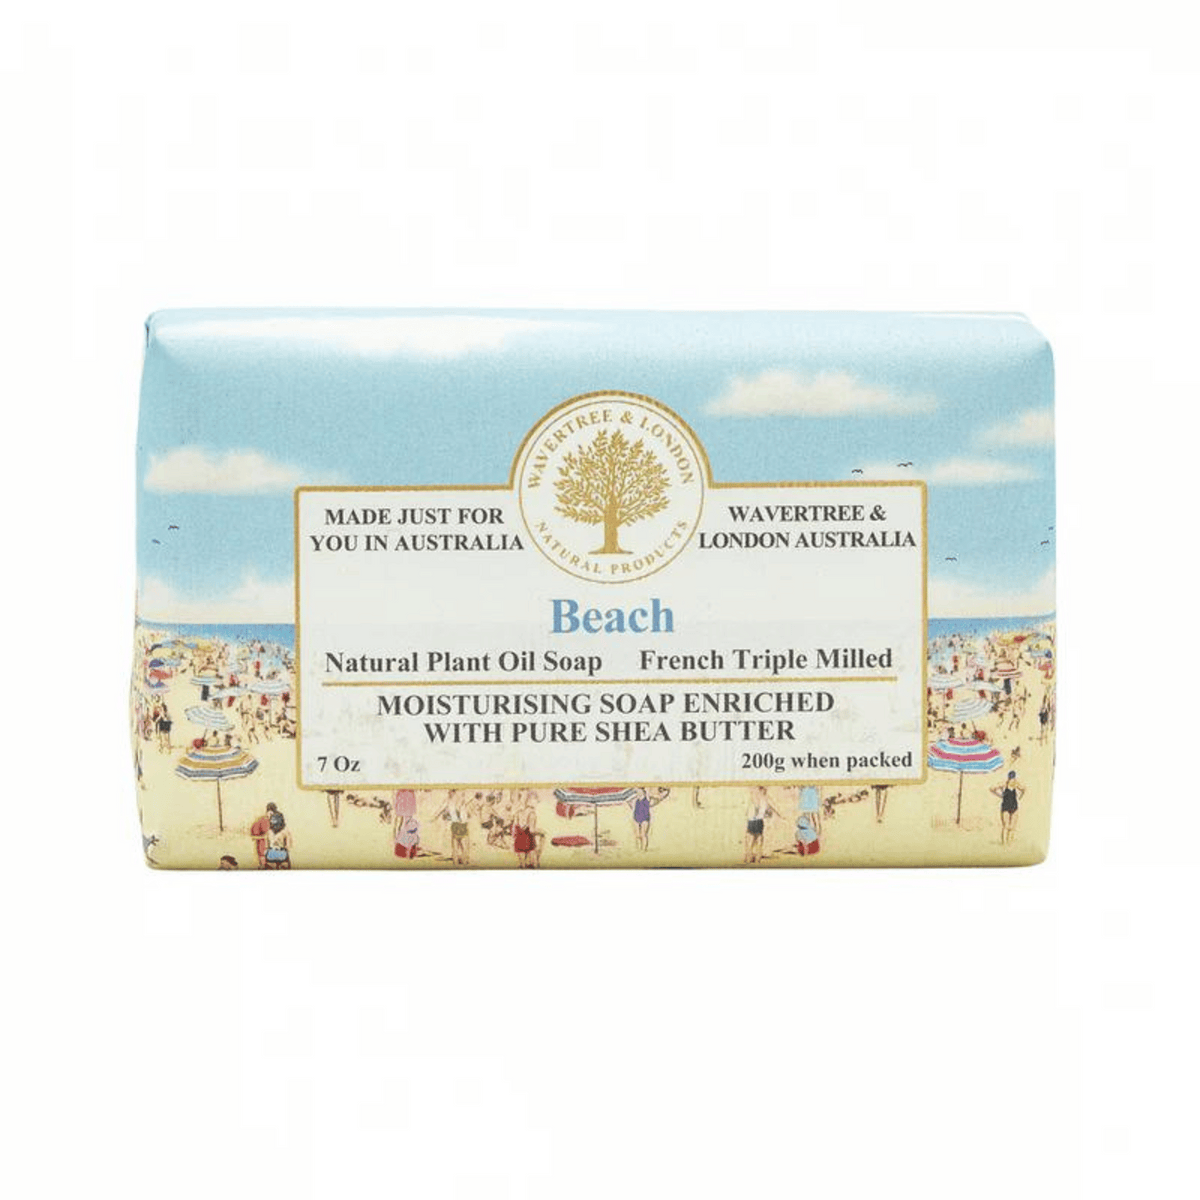 Primary Image of Beach Soap Bar